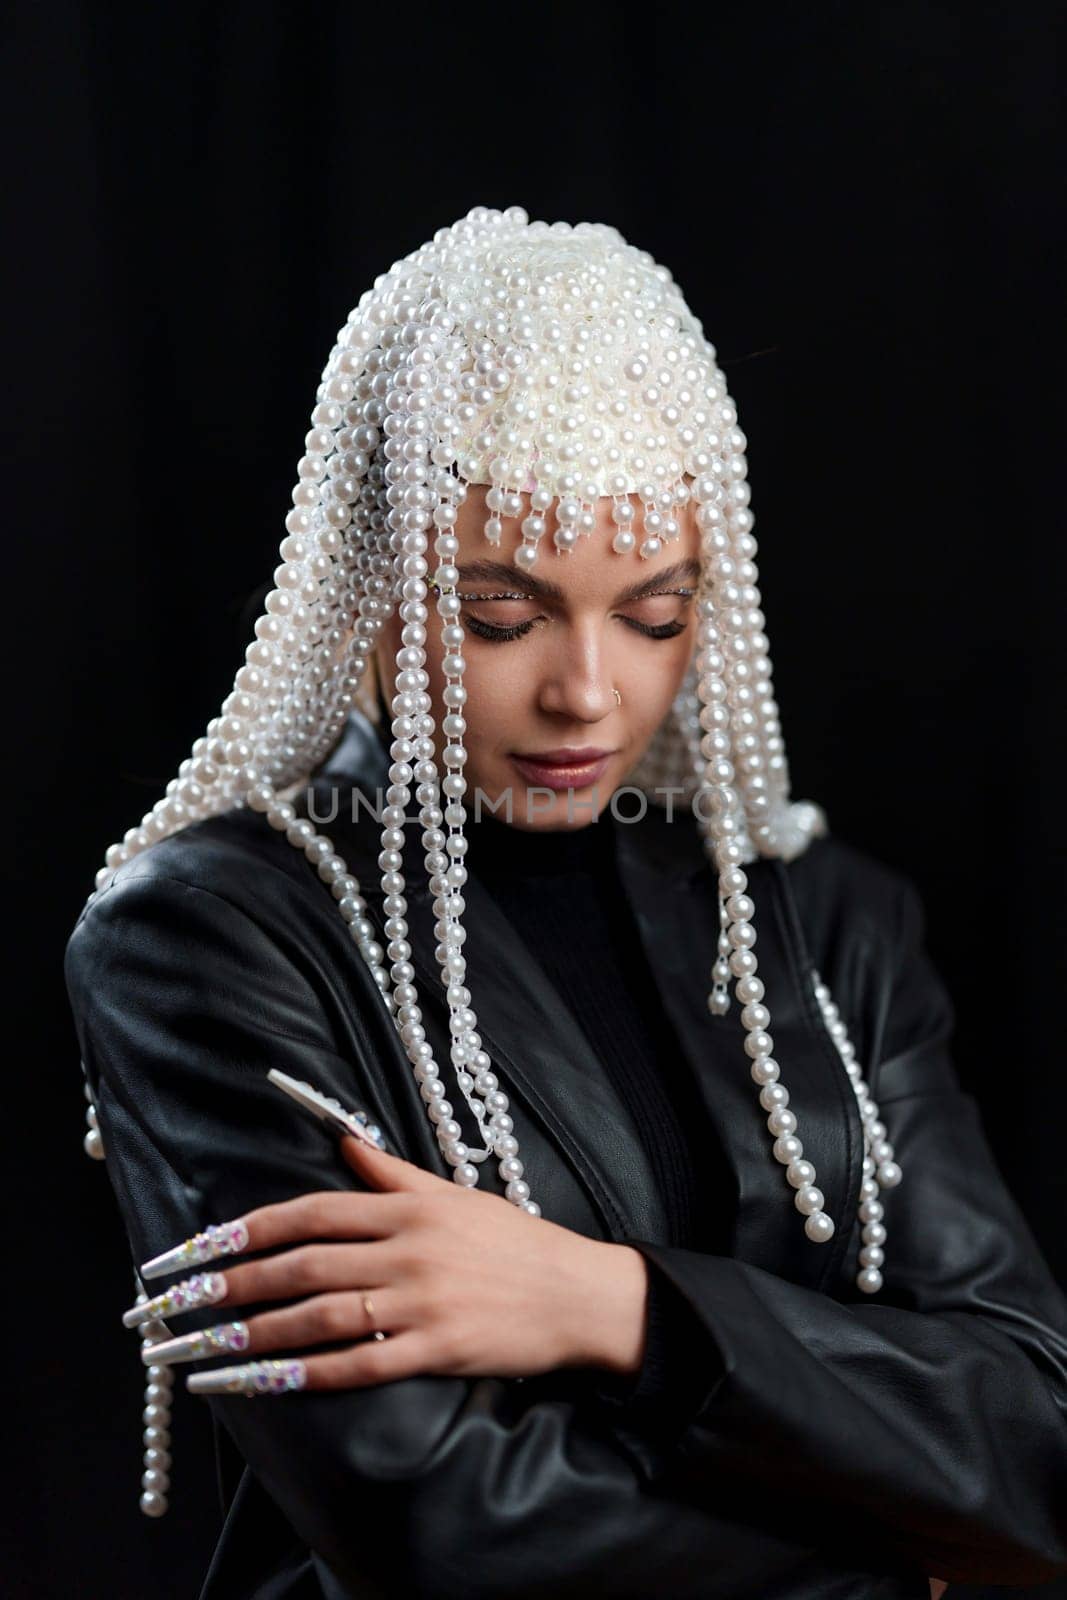 Studio portrait of a concentrated woman with fantasy costume with fake nails and a wig of pearl